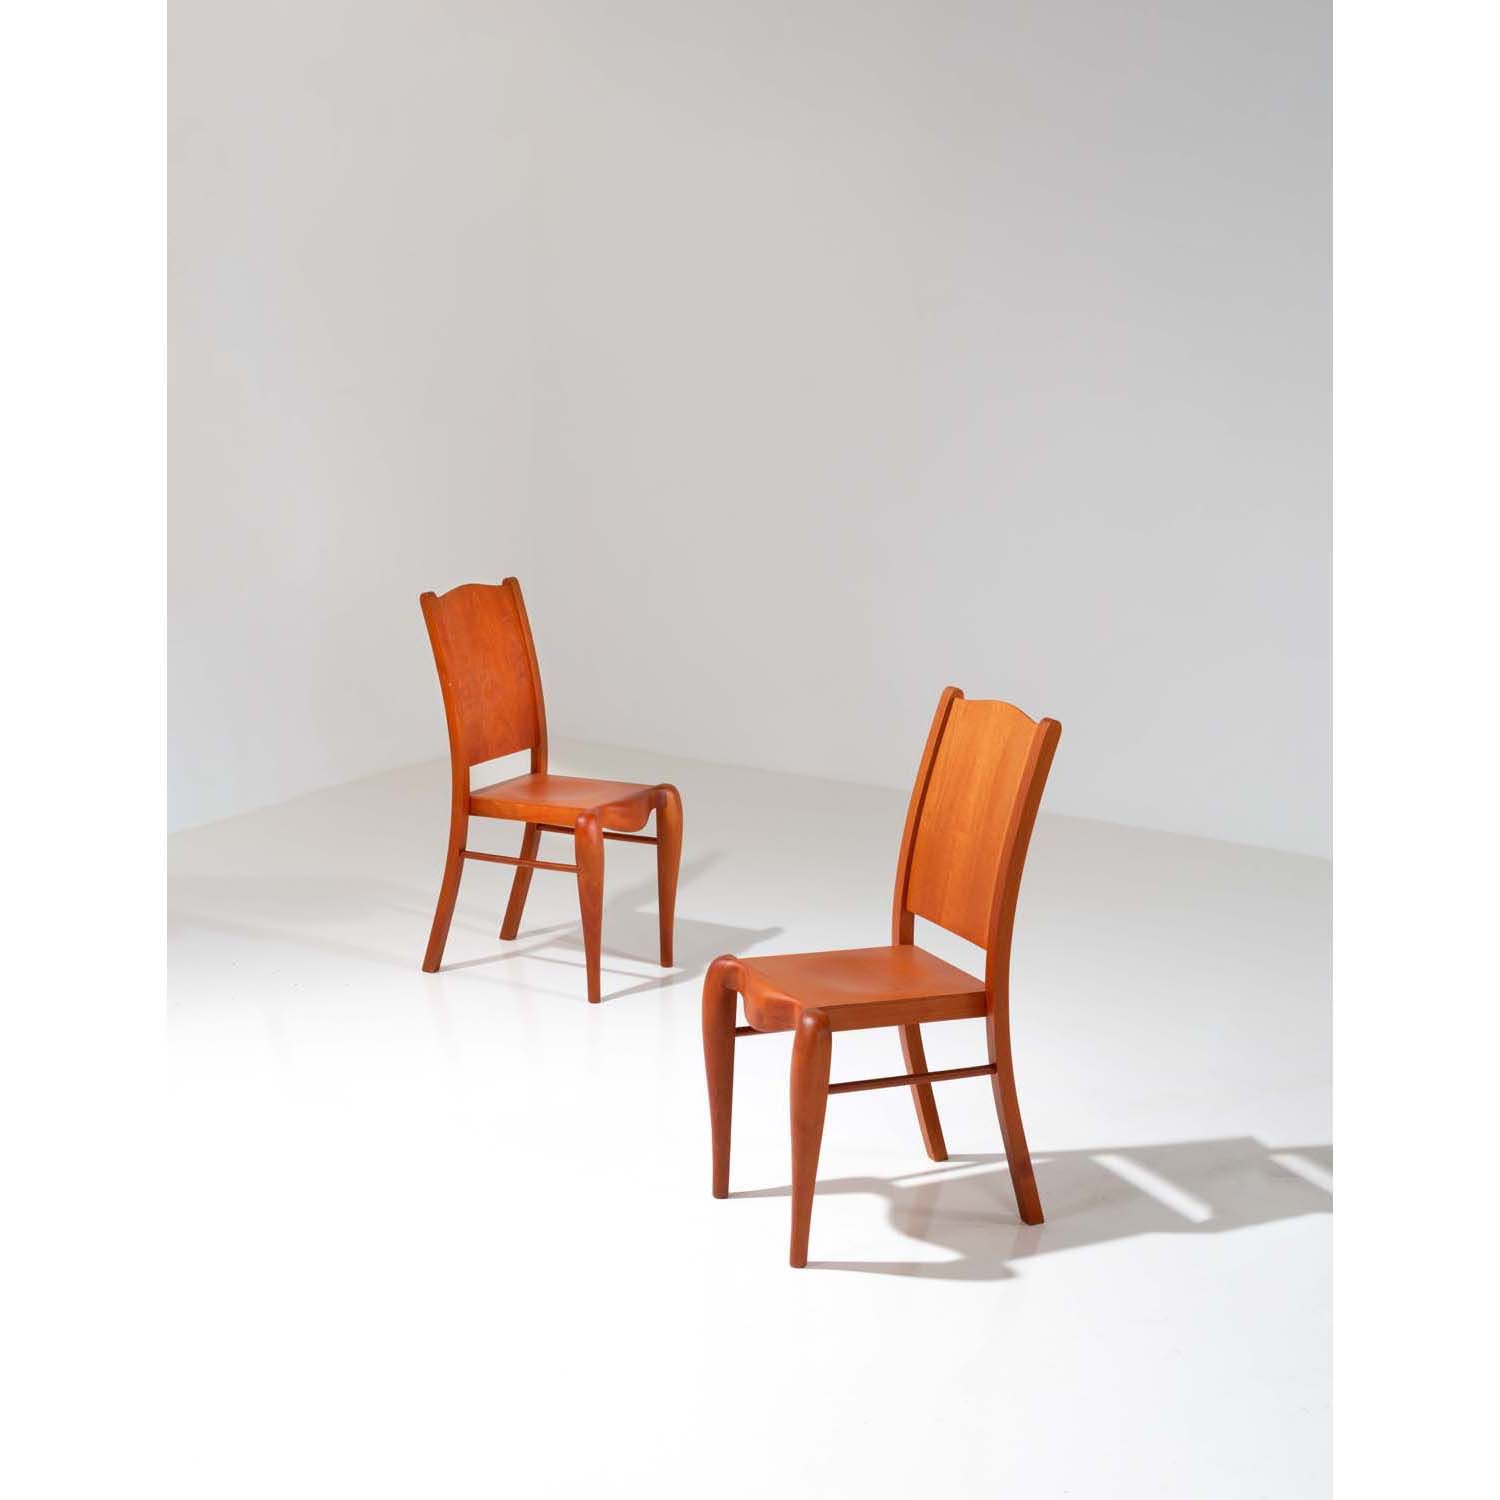 Null Philippe Starck (born 1949)
Pair of chairs, model 'Placide of the wood'
Che&hellip;